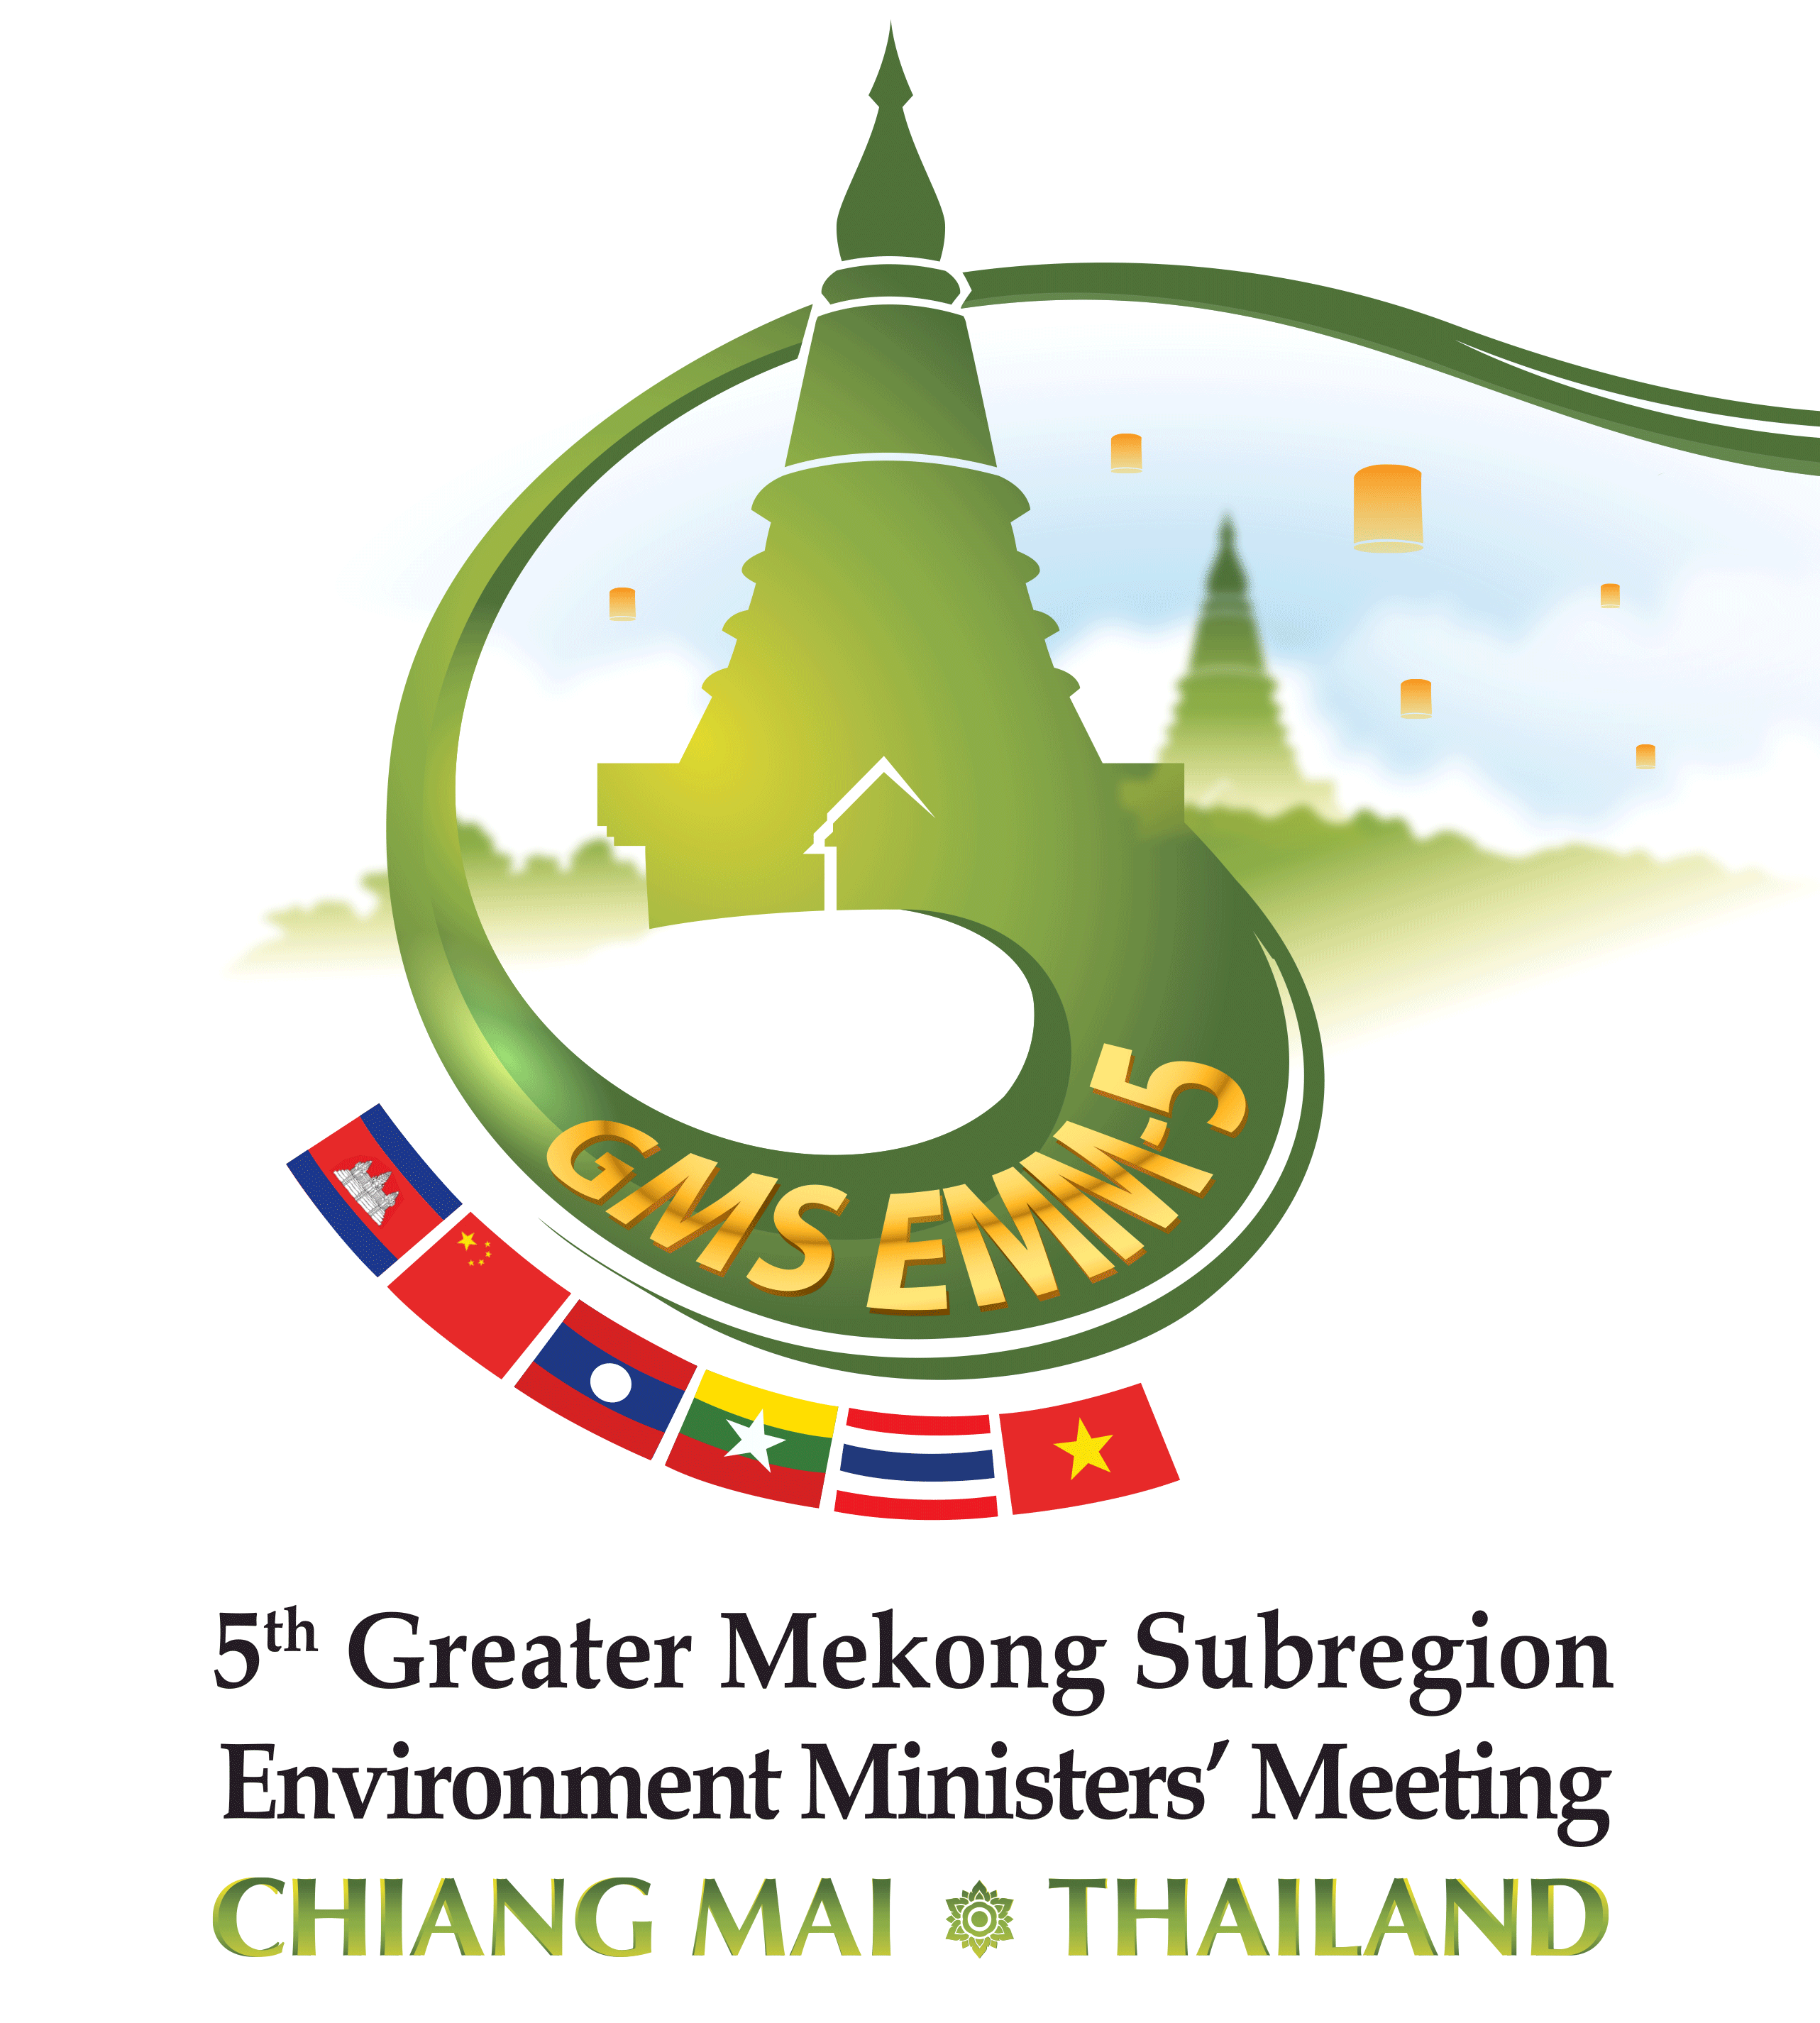 Fifth Greater Mekong Subregion Environment Ministers' Meeting - Chiang Mai - Thailand